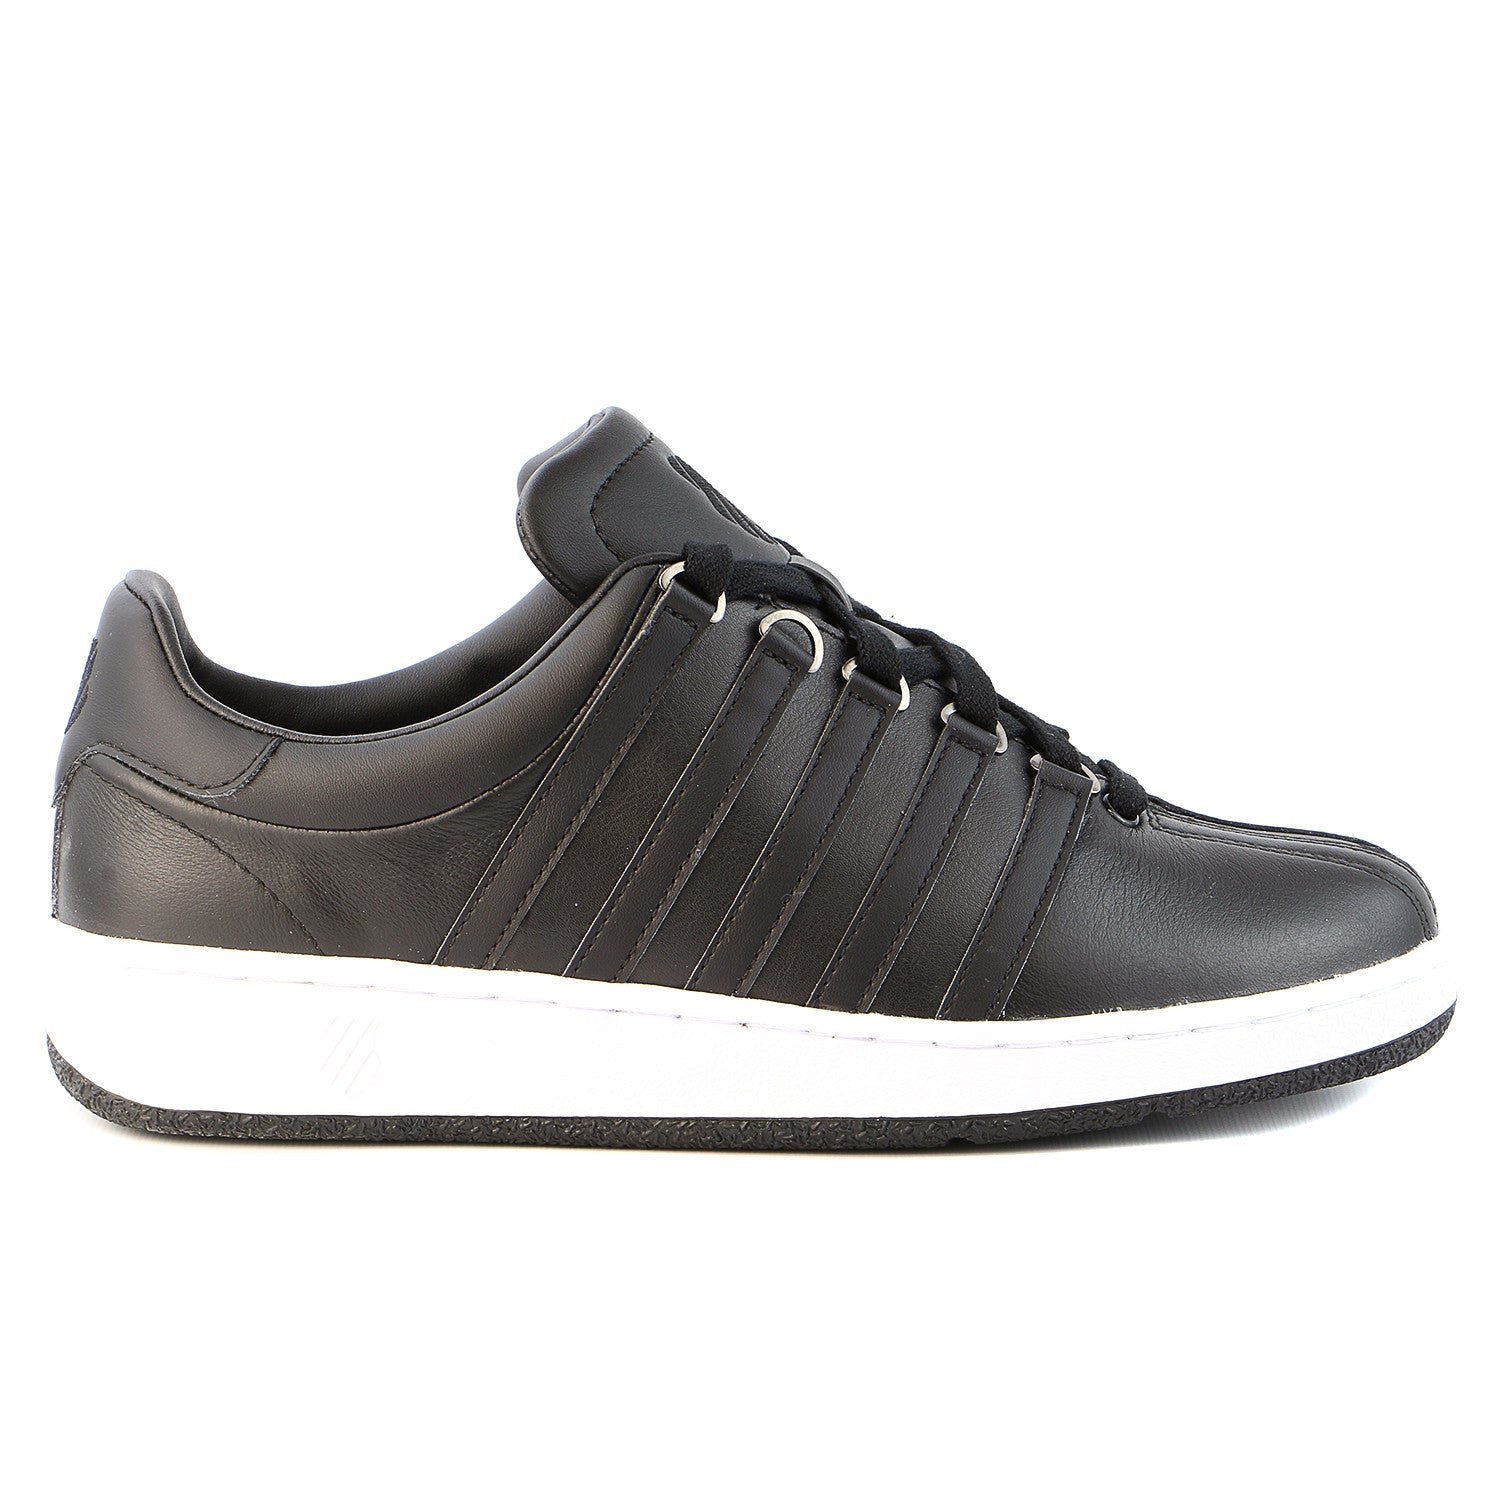 K-Swiss Classic Vintage Updated Iconic Tennis Sneaker Shoe - Black/Whi -  Shoplifestyle